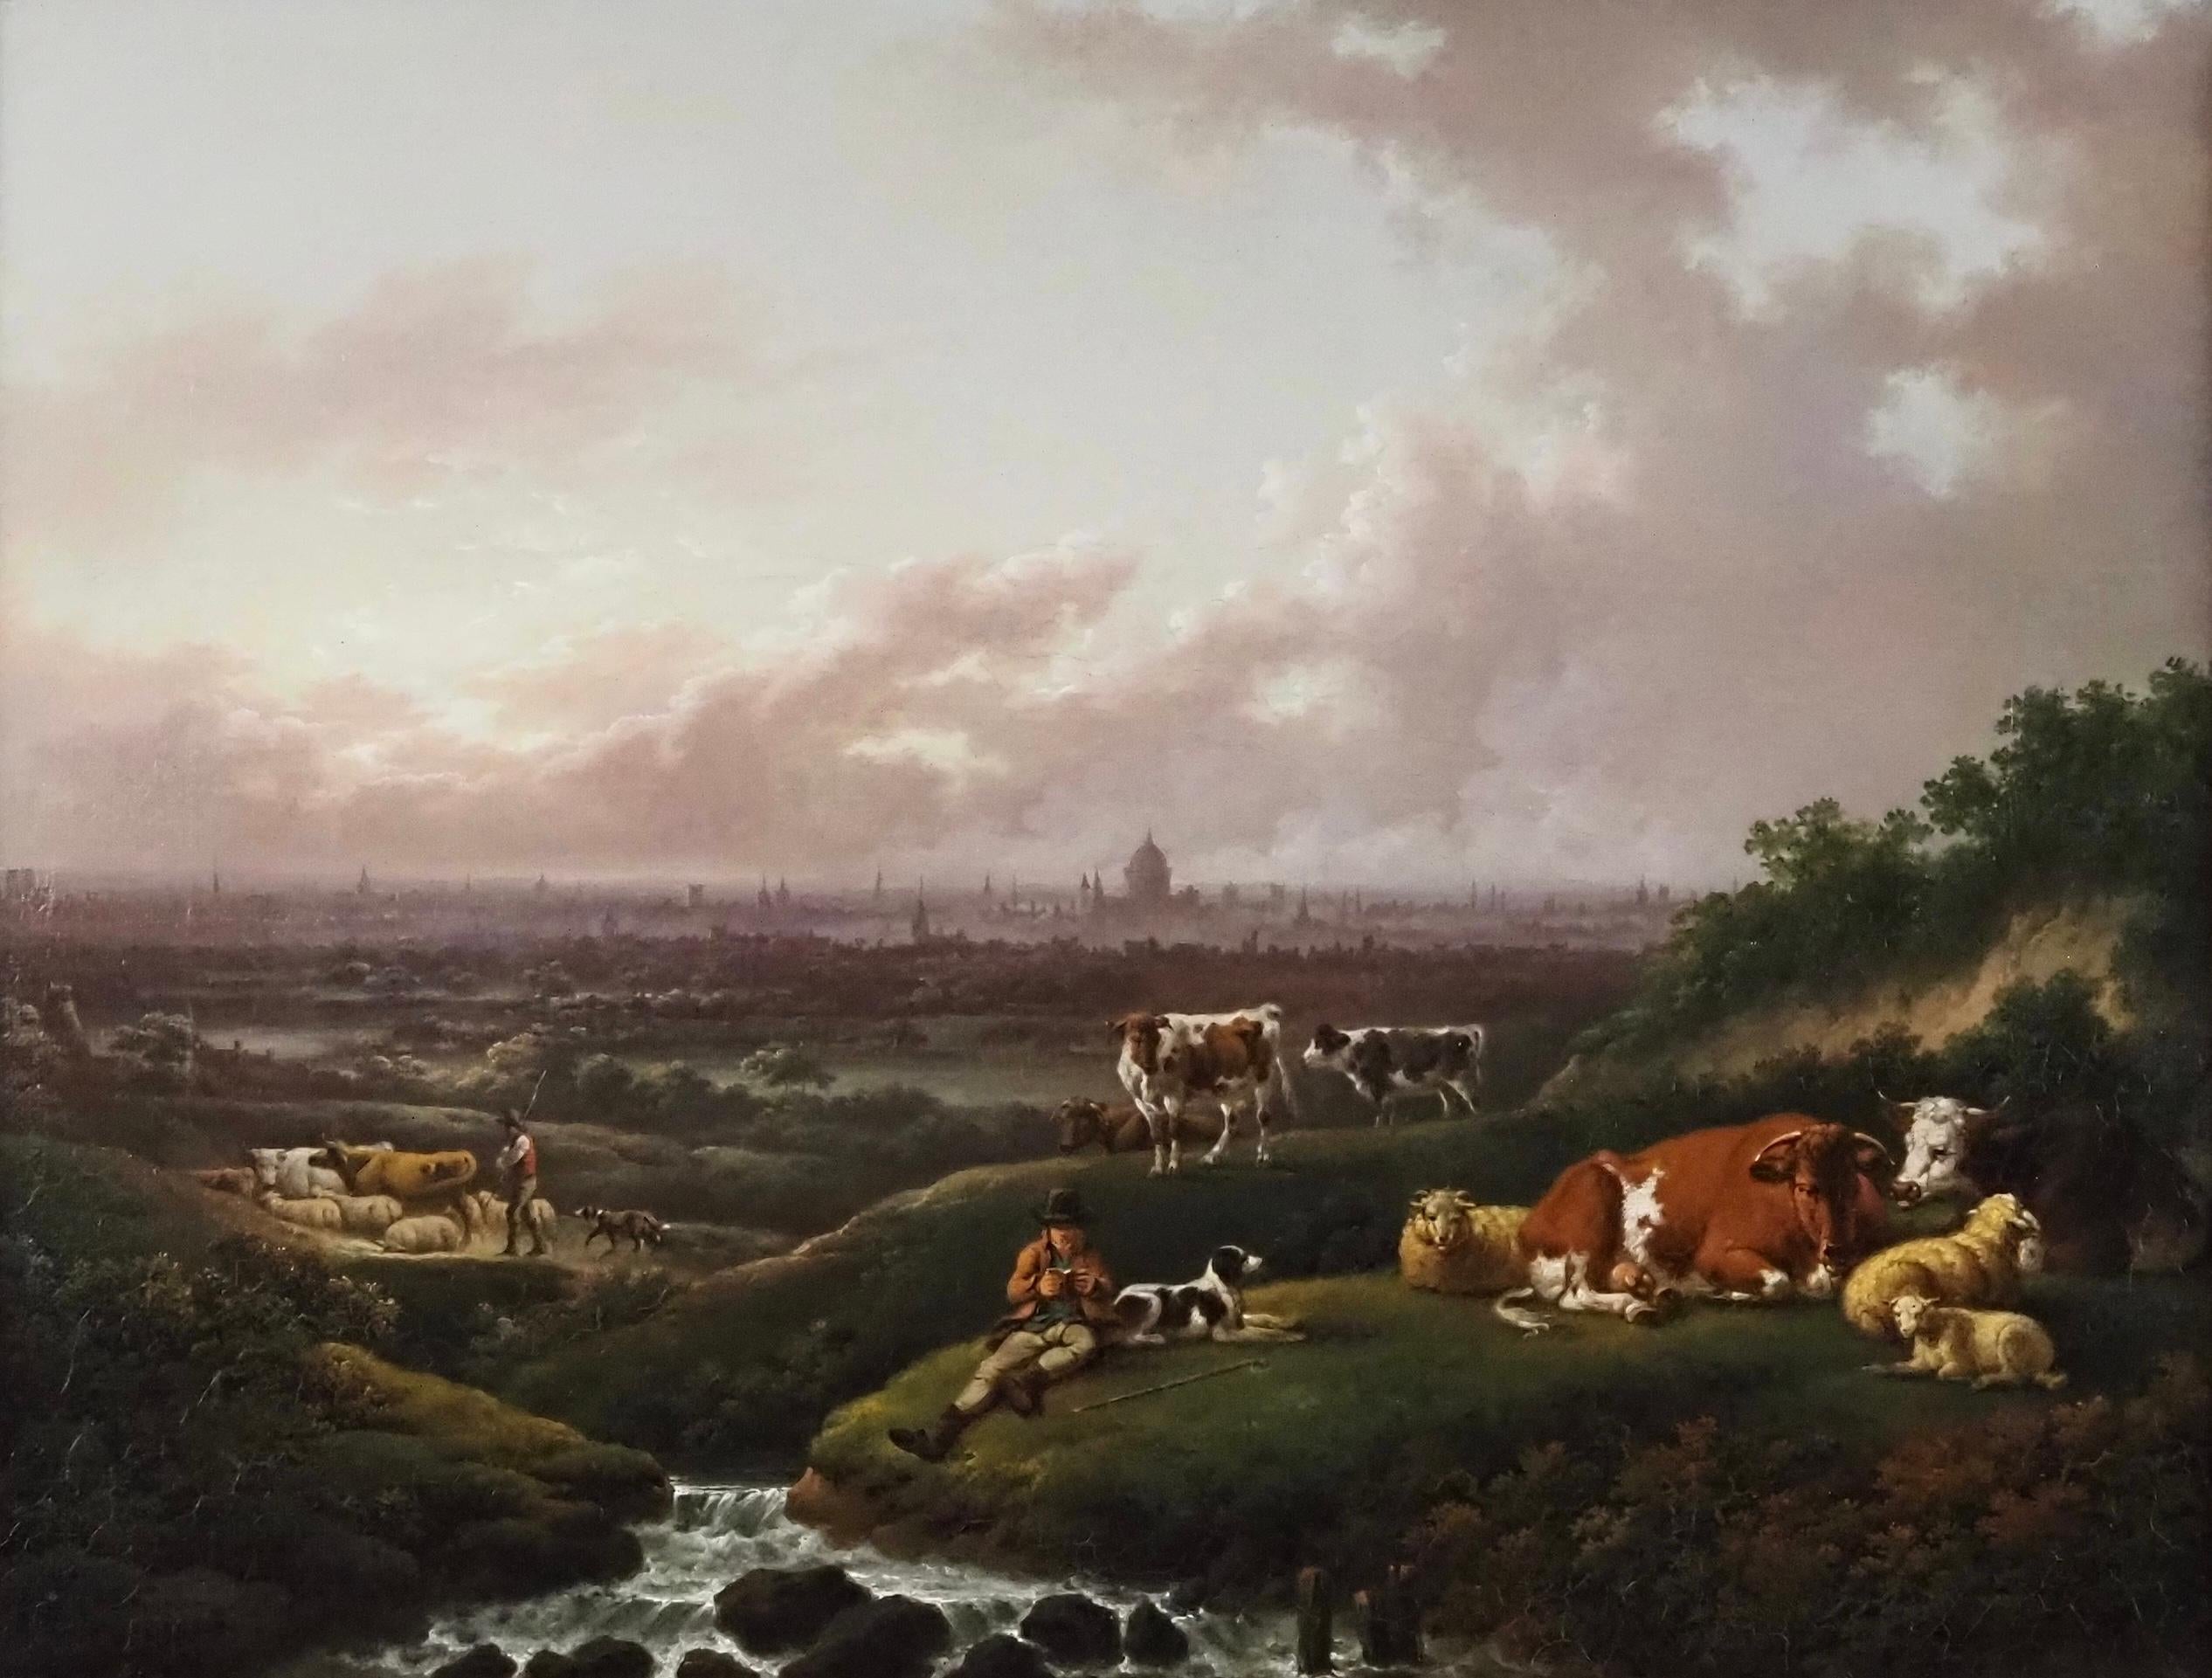 London : A distant view of the city from the south with a herdsman and cattle  - Painting by Charles Towne